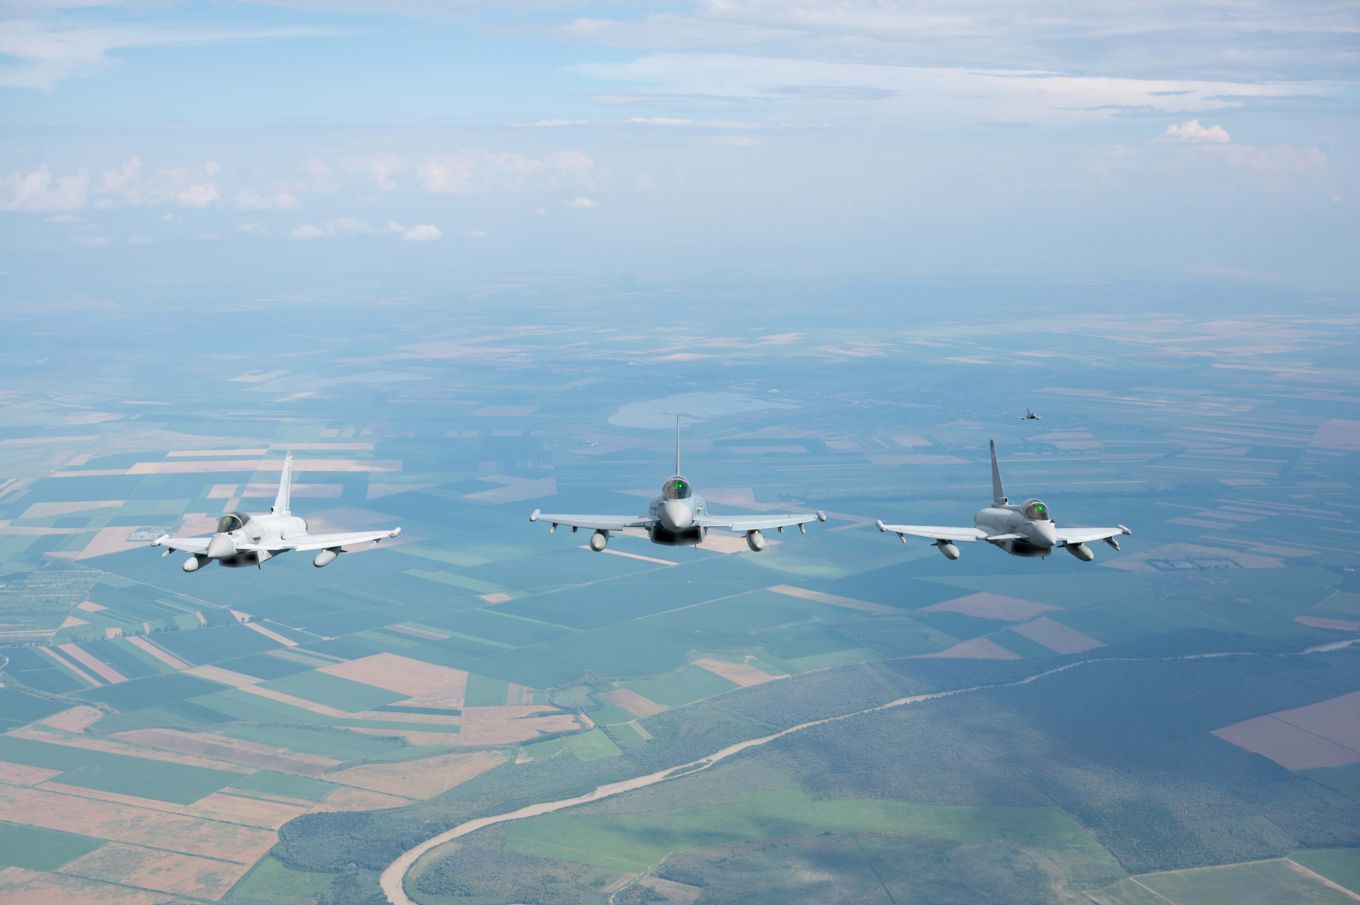 Three German Eurofighters and one in the background flying.